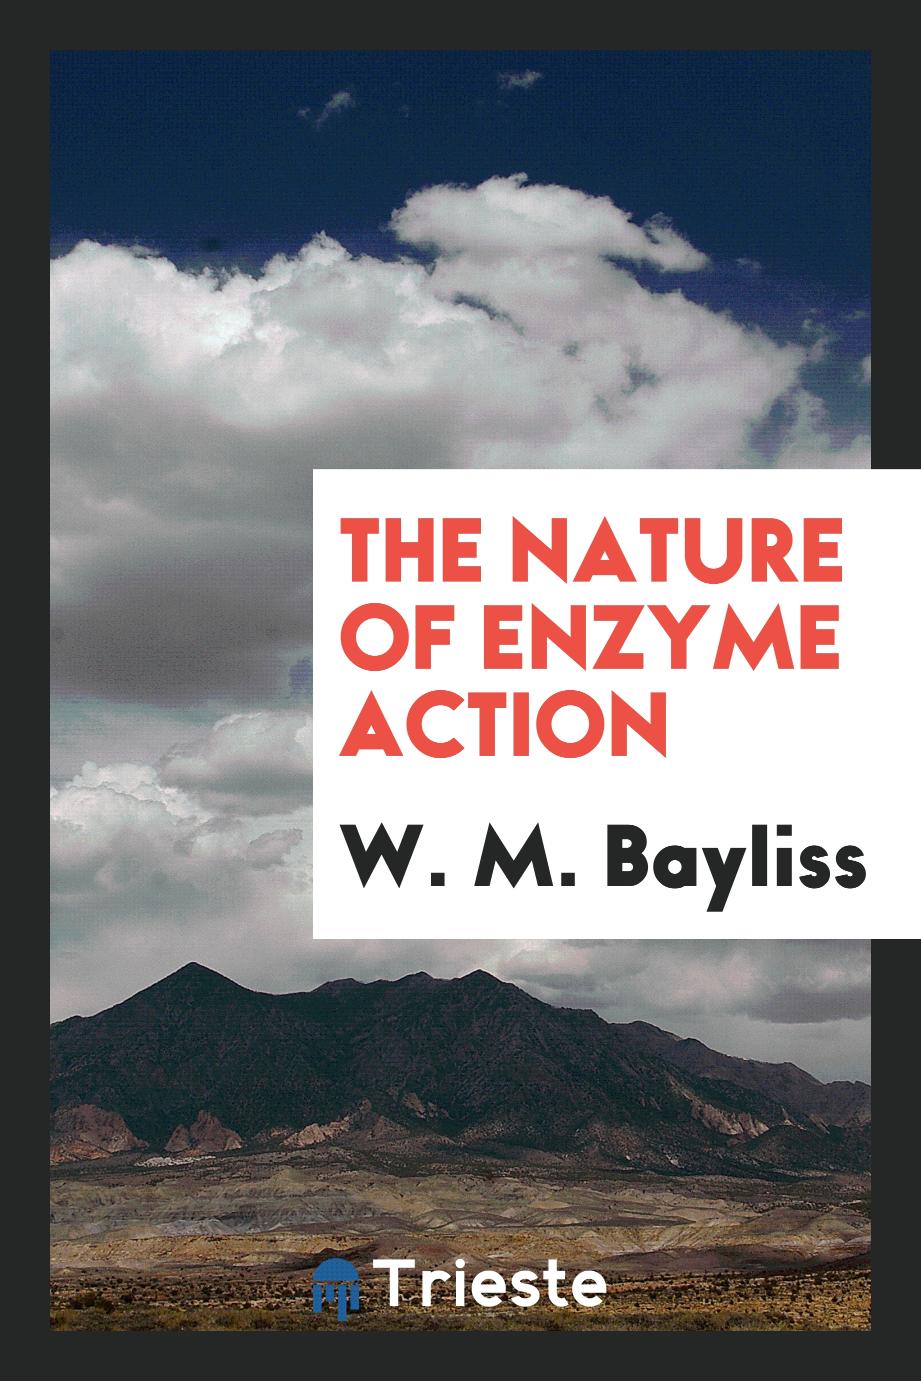 The nature of enzyme action